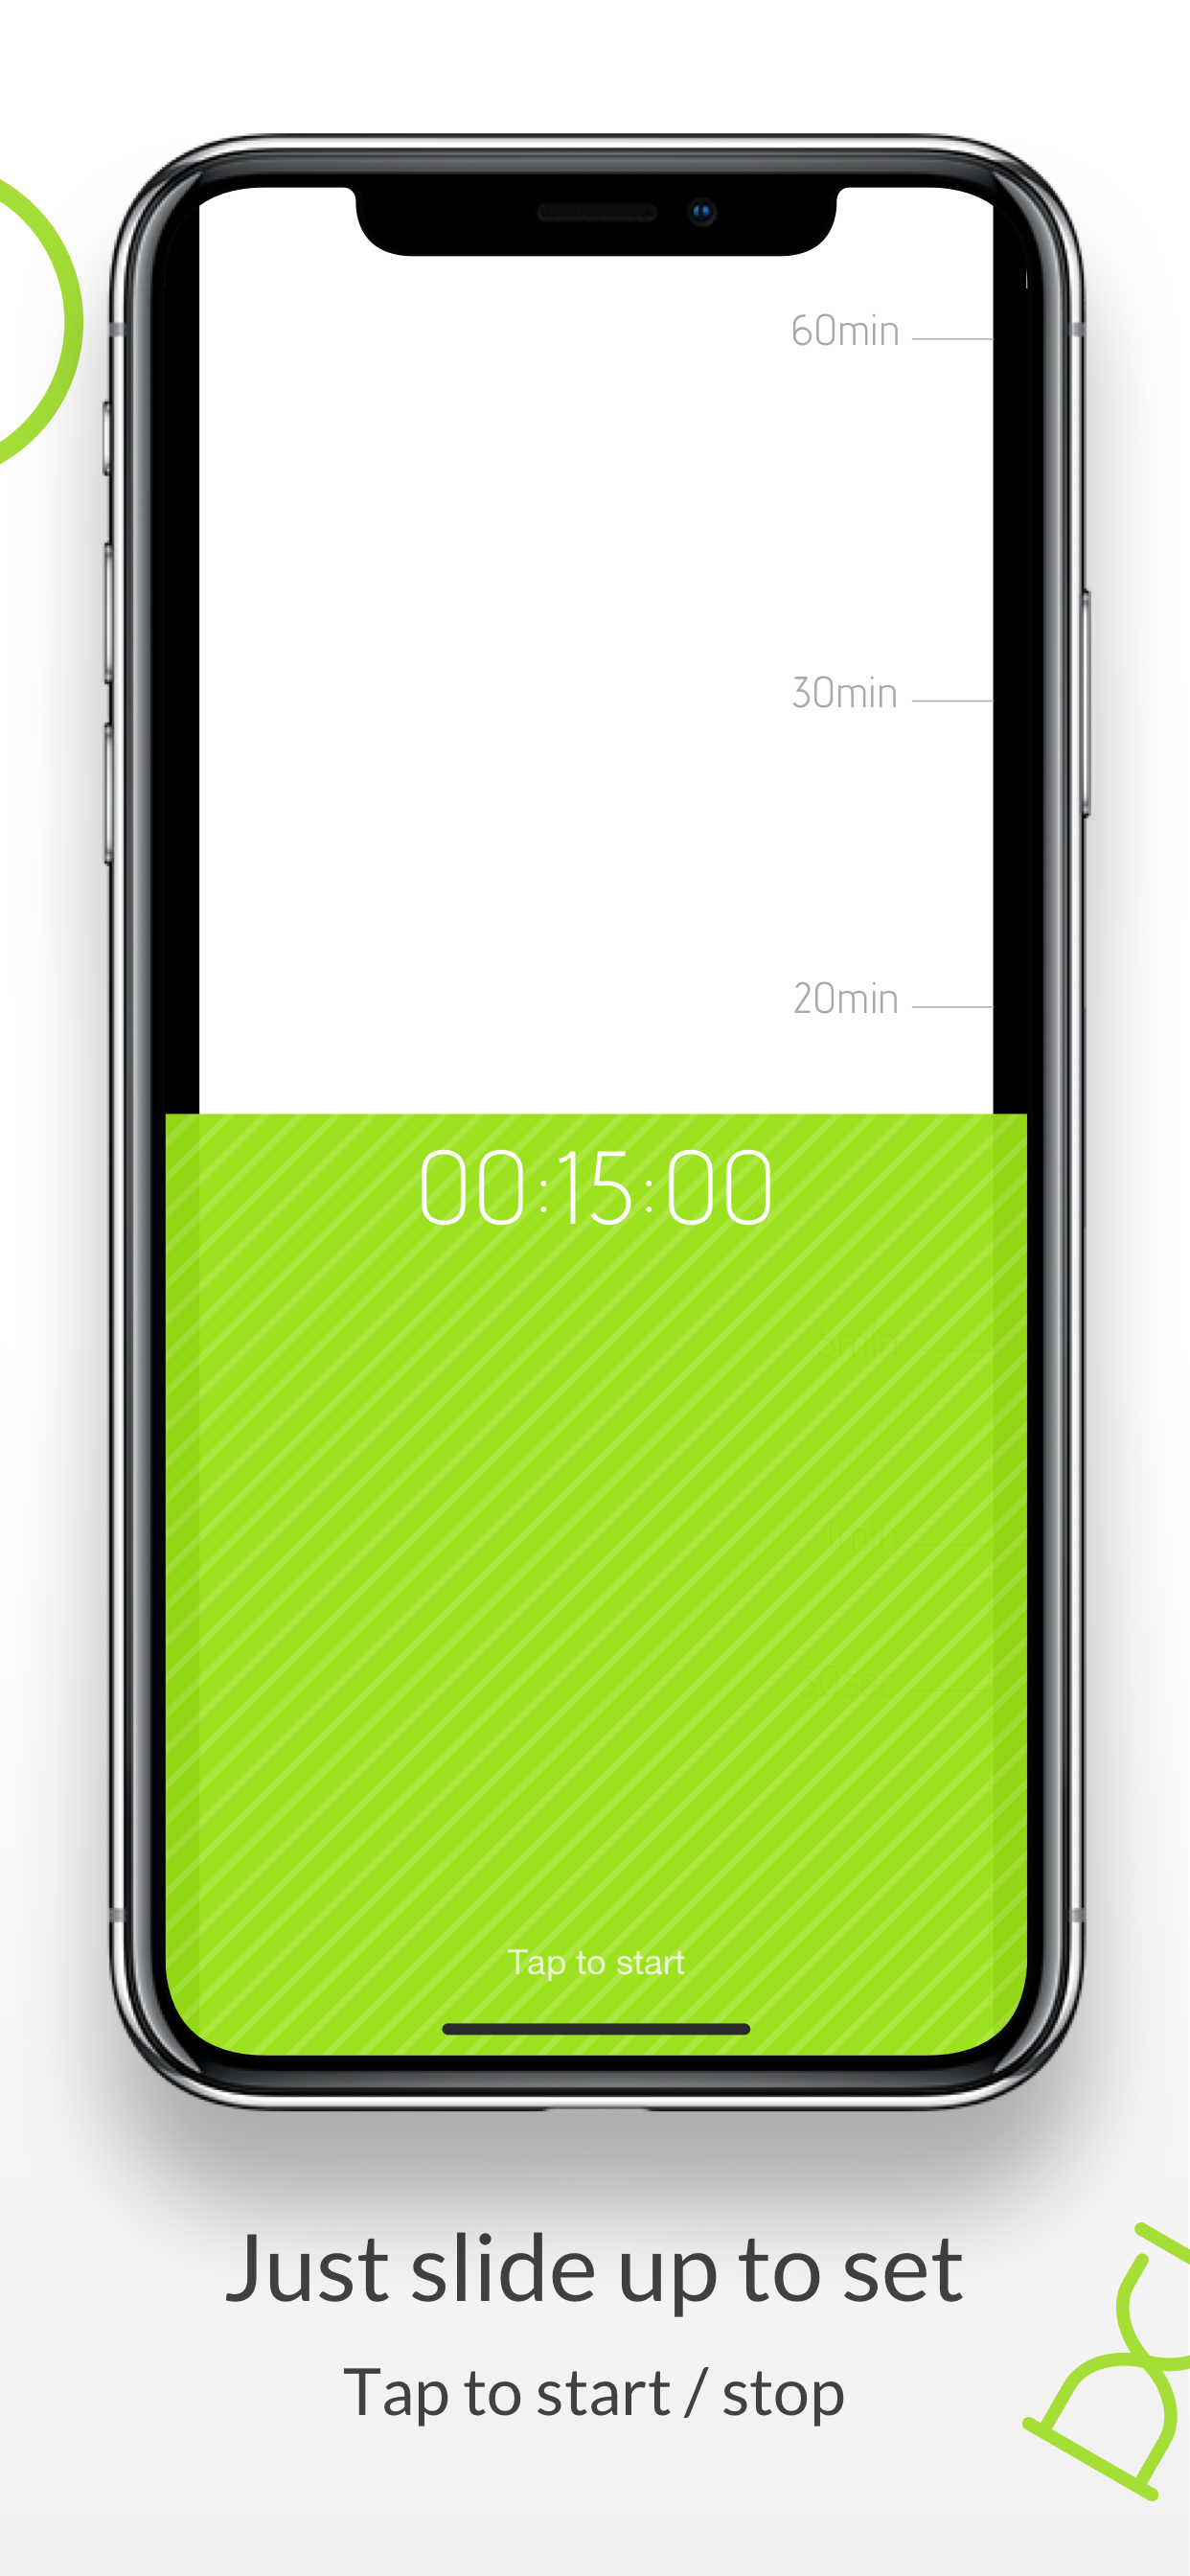 Simple Repeat Timer